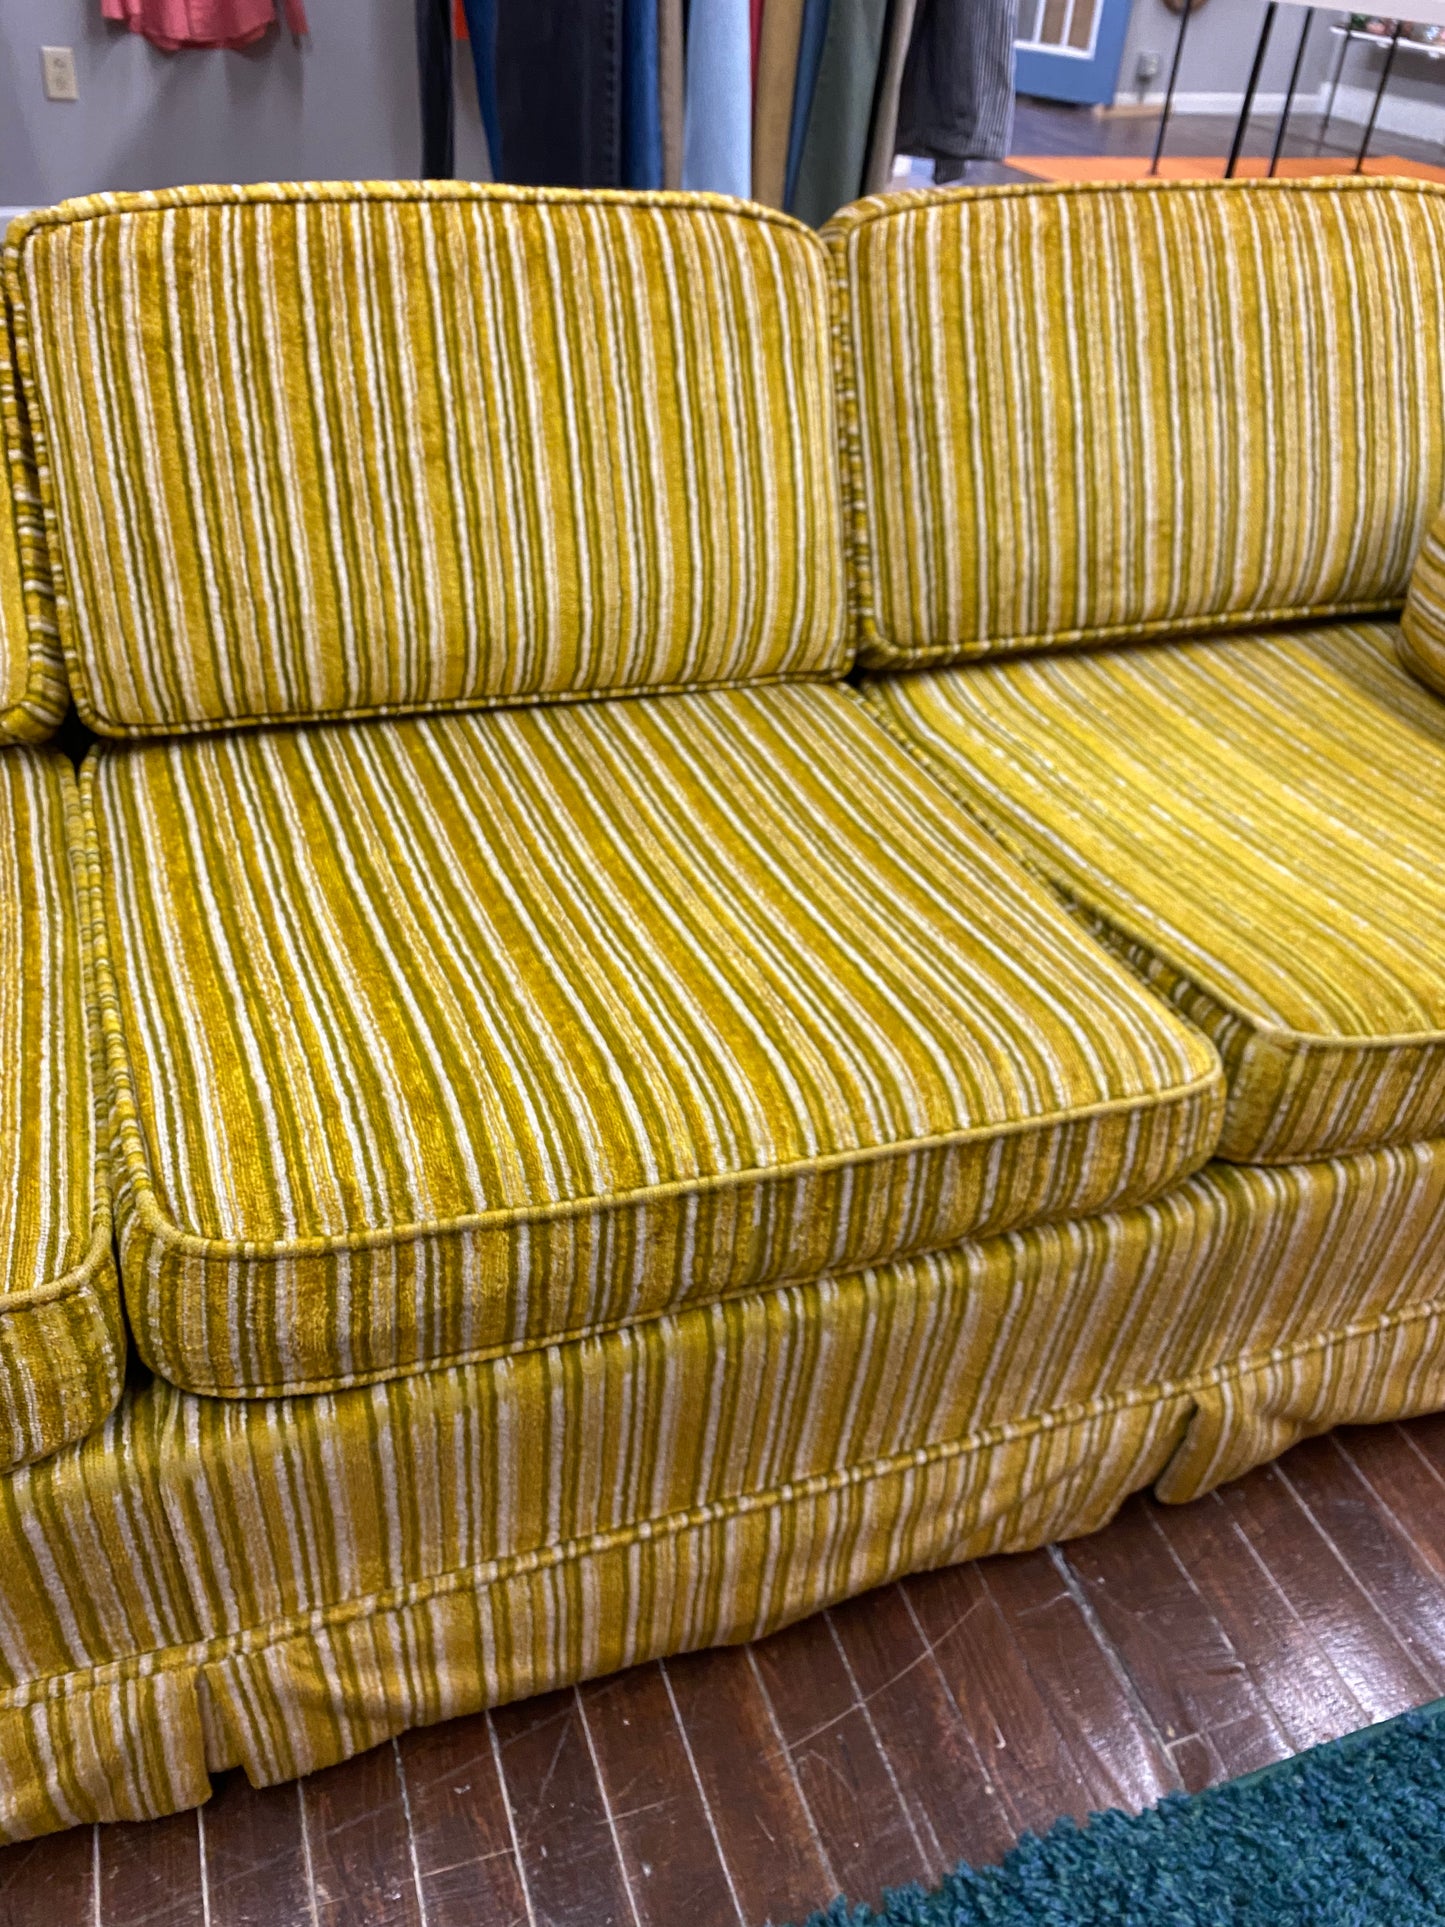 Vintage 1970s Dwyer’s Brothers Yellow Velour Sofa